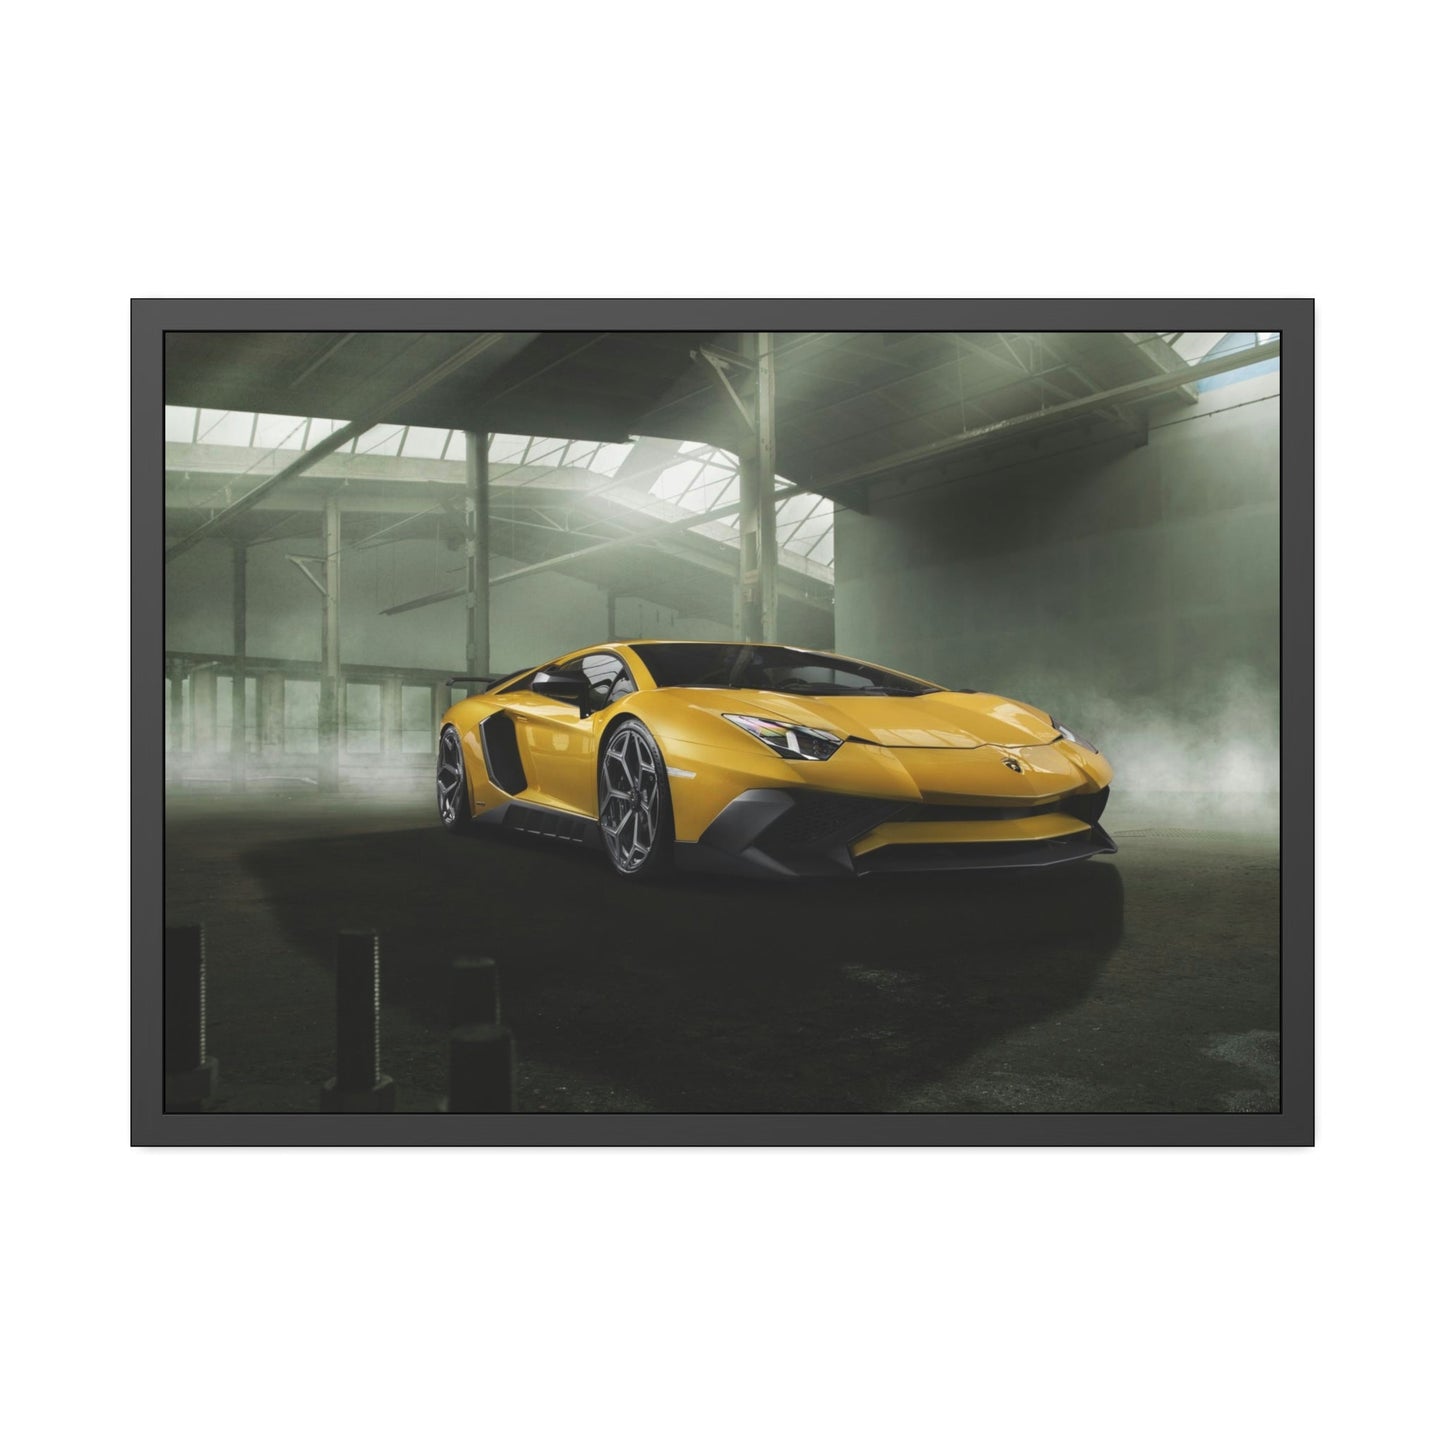 Racing Legends: Iconic Porsche Art Prints and Framed Posters